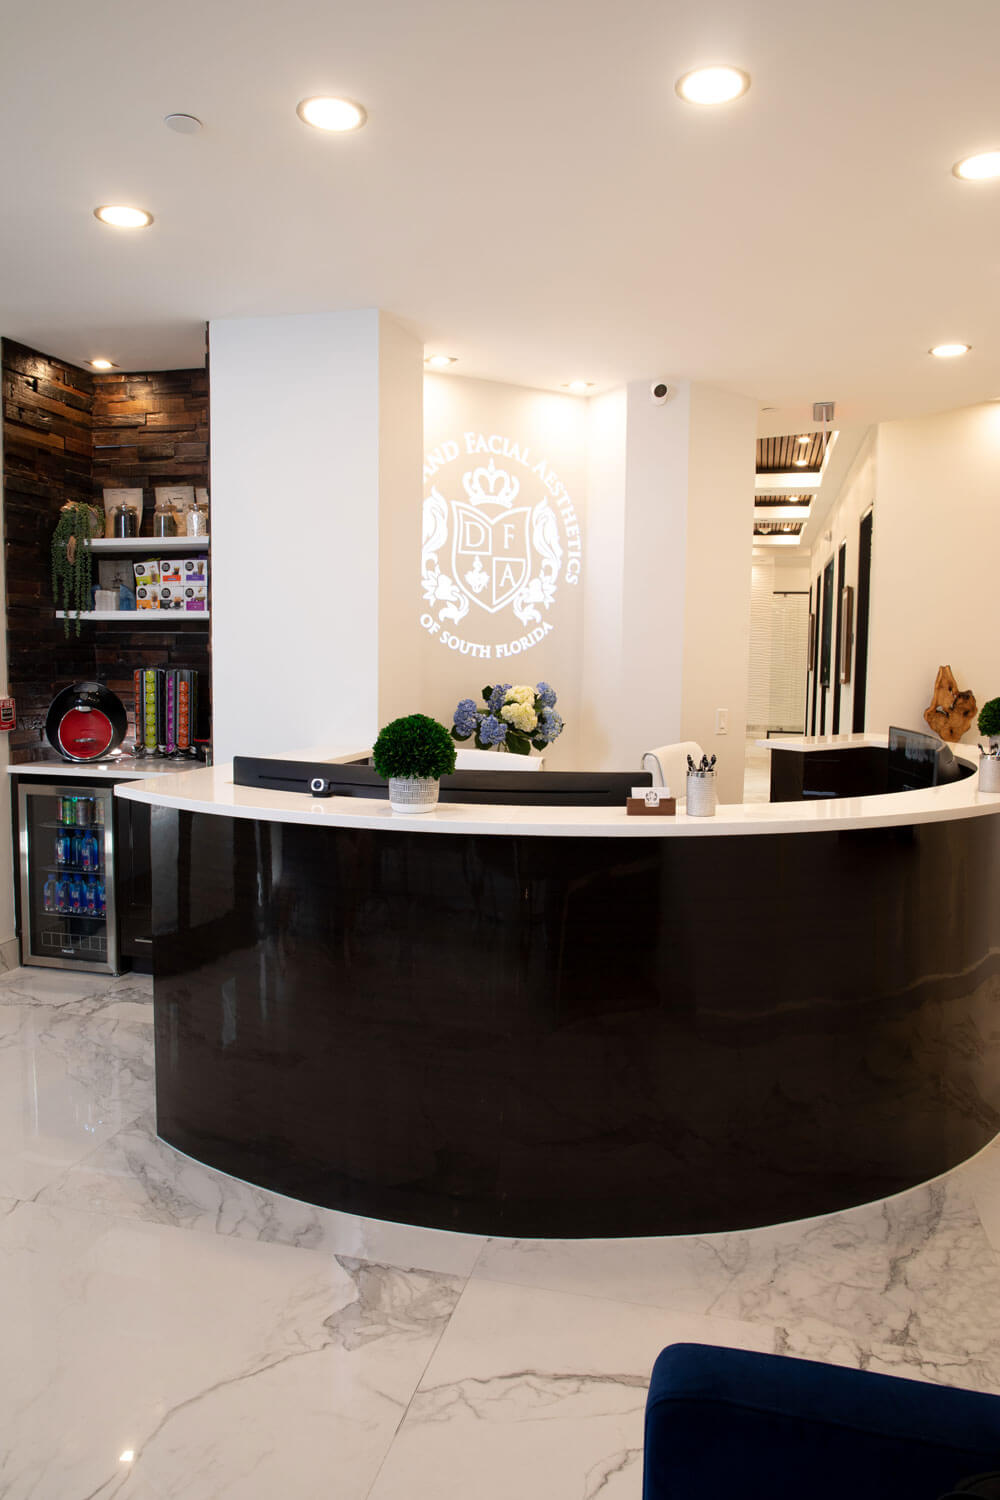 Reception desk at the dental and aesthetic clinic